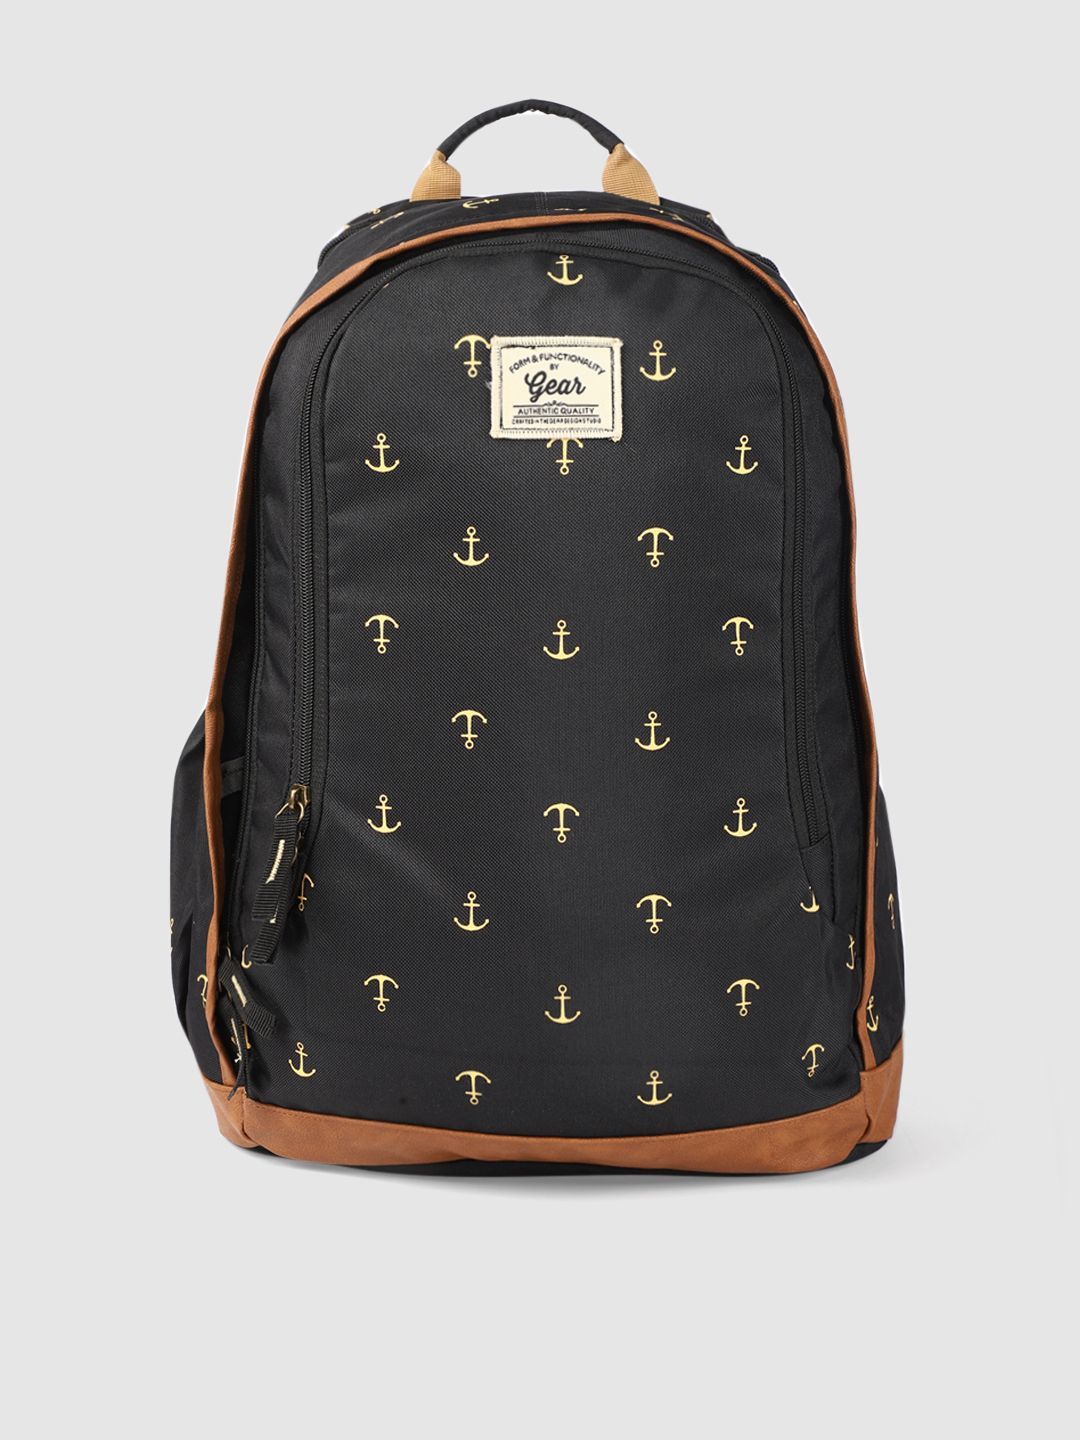 Gear Unisex Black Anchor Print Laptop Backpack Price in India